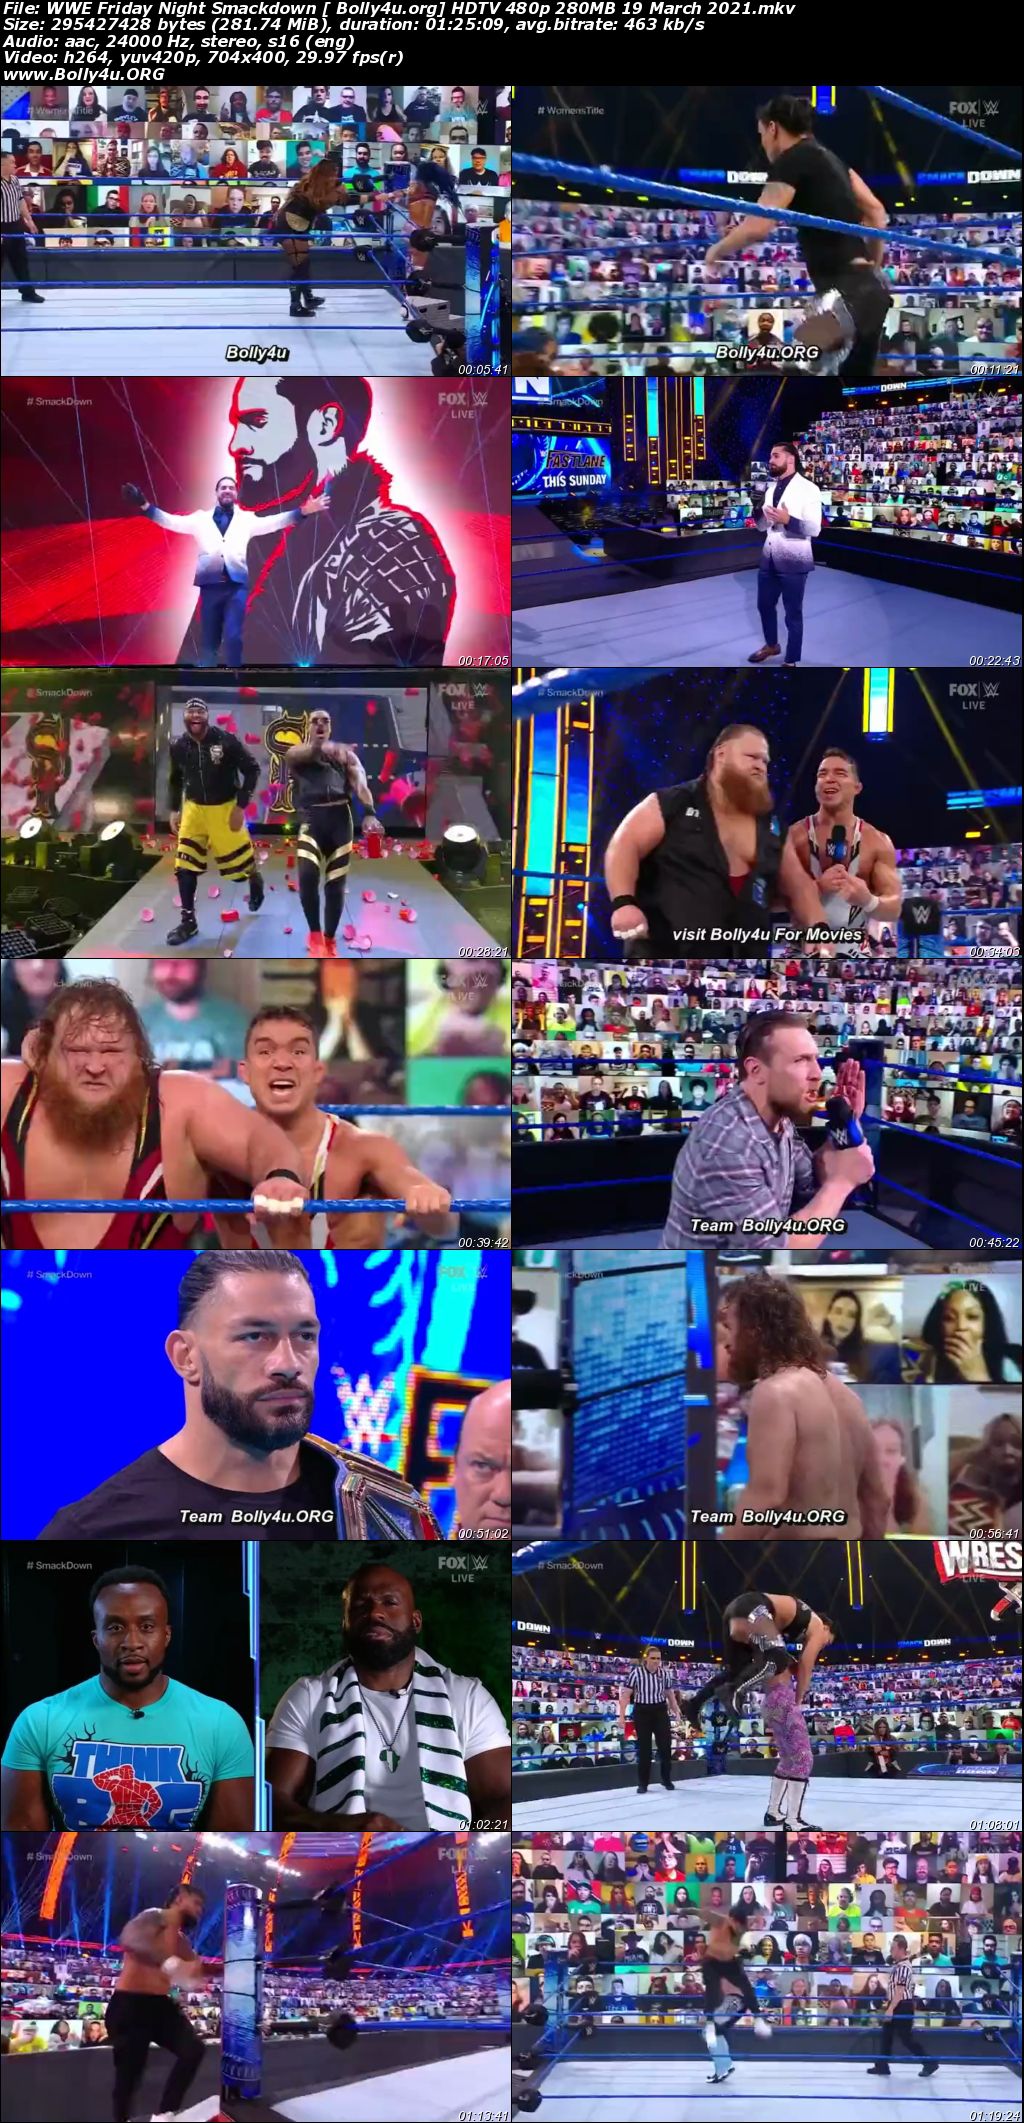 WWE Friday Night Smackdown HDTV 480p 280MB 19 March 2021 Download